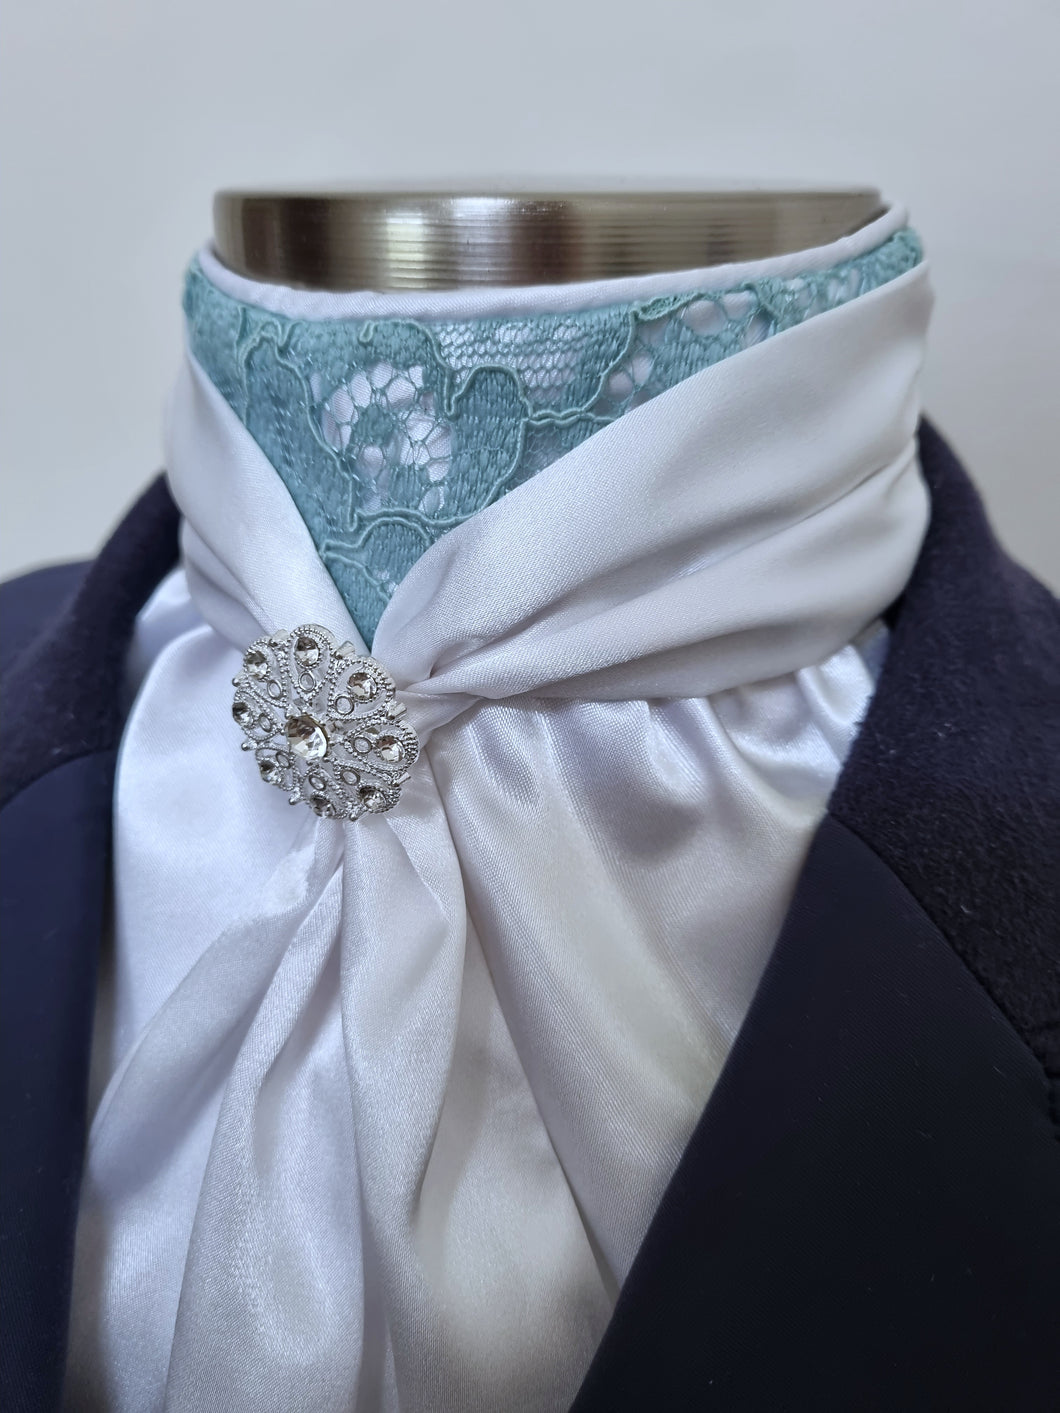 ERA Elle Stock Tie - Soft Ties with Mint Lace detail and Brooch